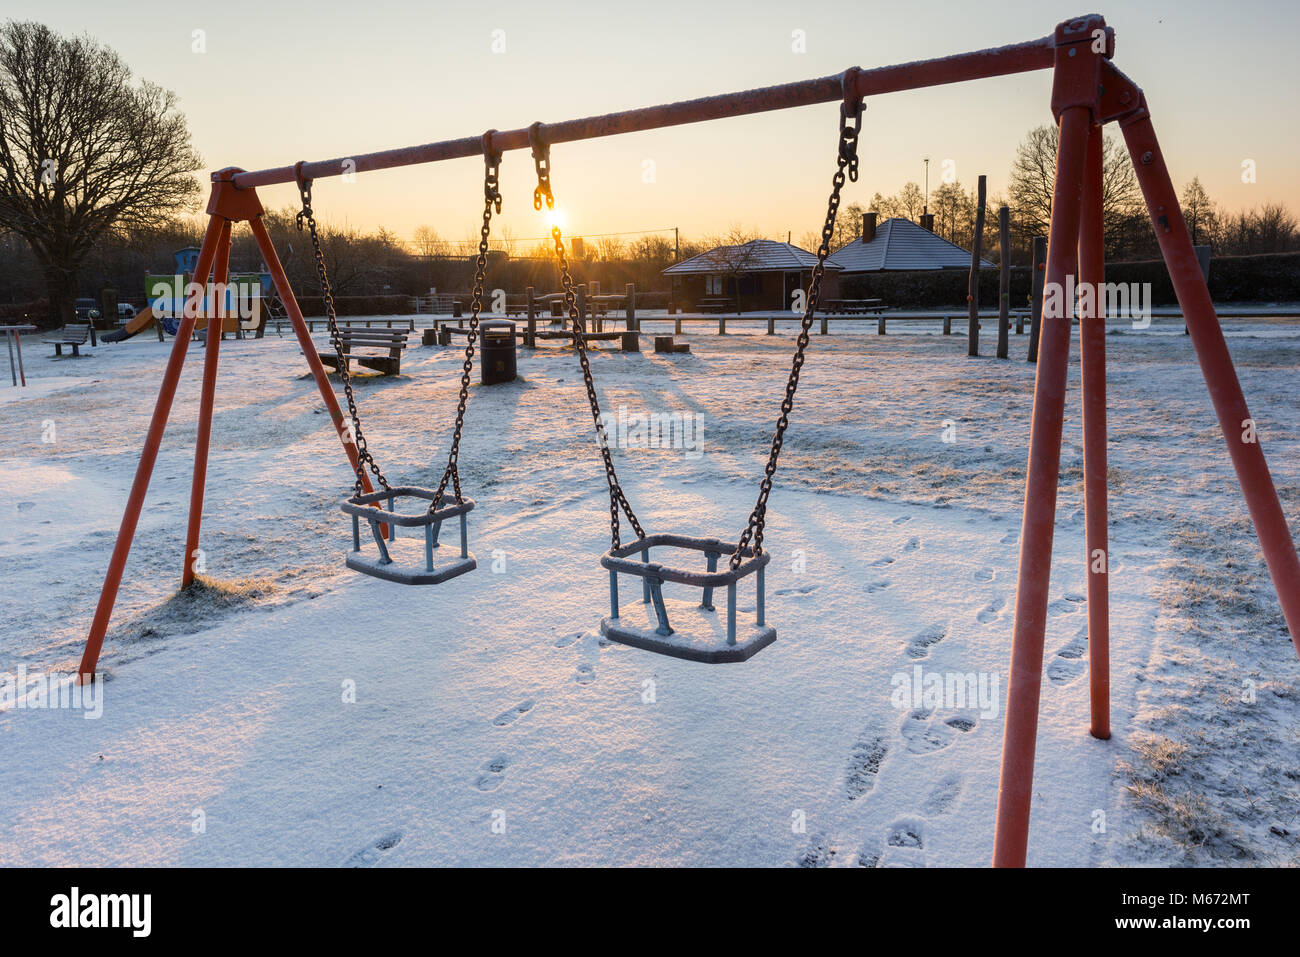 Swings in a children's playground at sunrise on a snowy winter's day, Fordingbridge, New Forest, Hampshire, UK Stock Photo